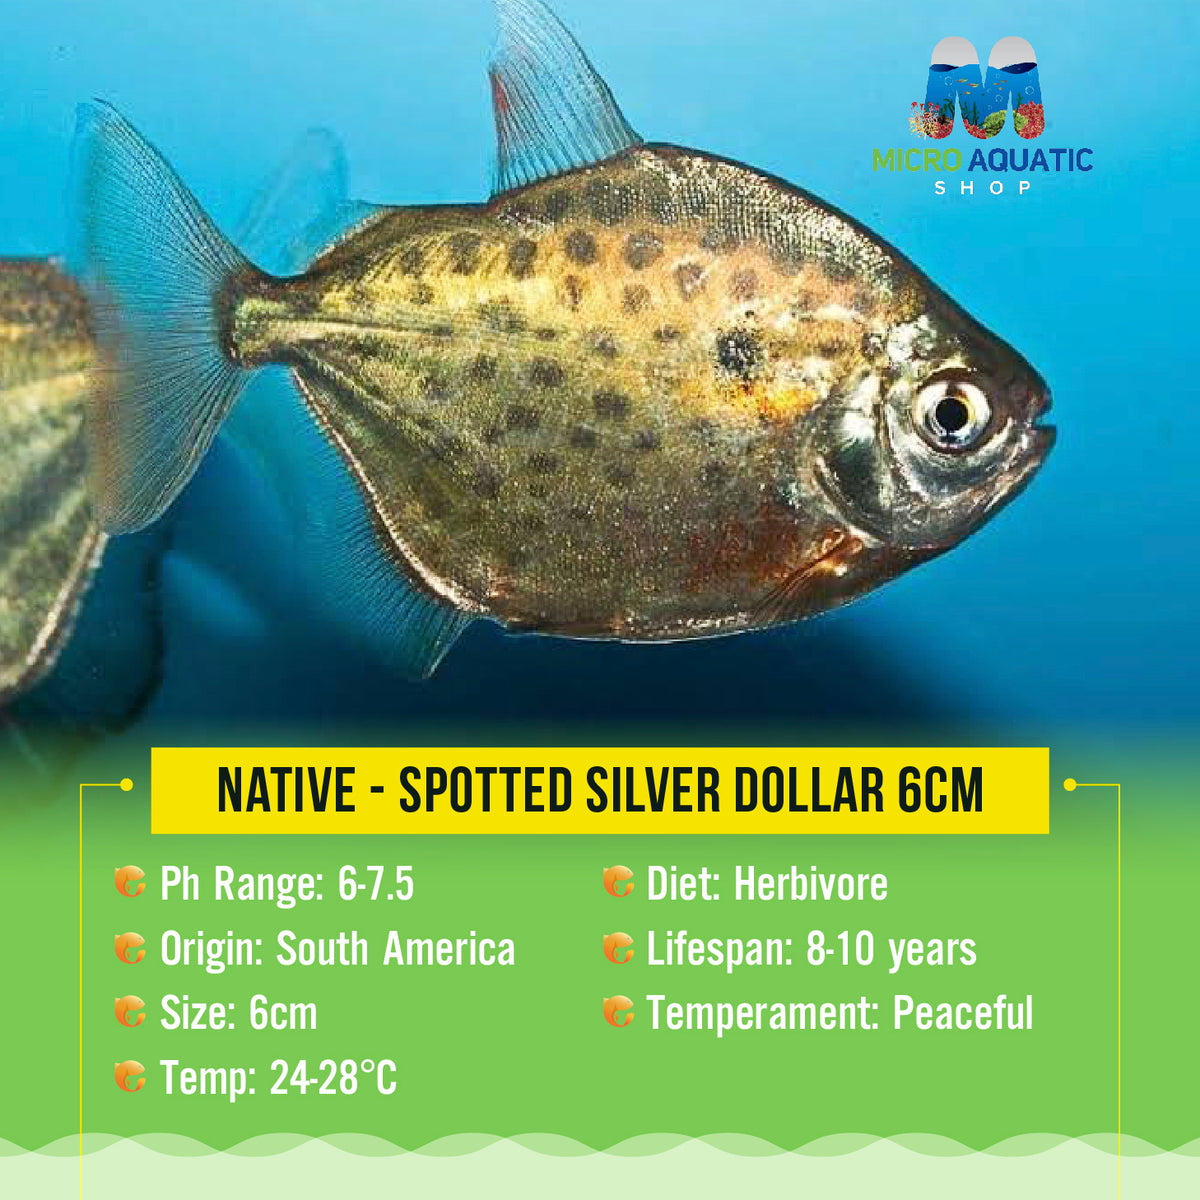 Native - Spotted Silver Dollar 6cm